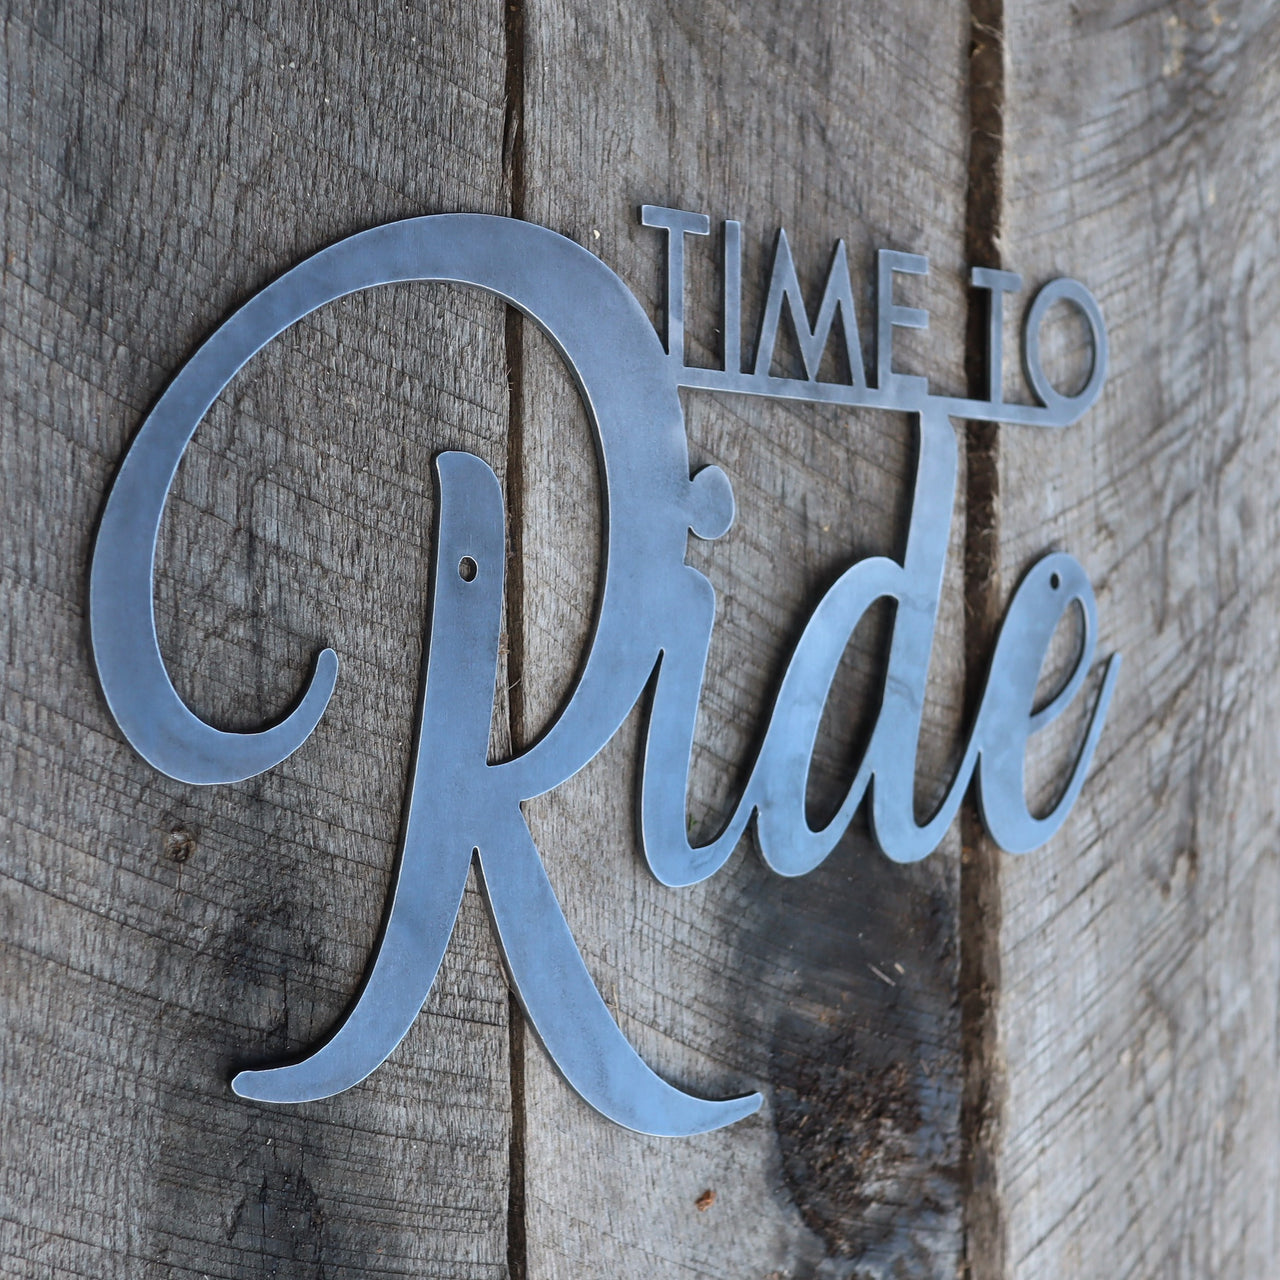 Time to Ride - Home Gym Sign - Work Out, Exercise, Biking Decor